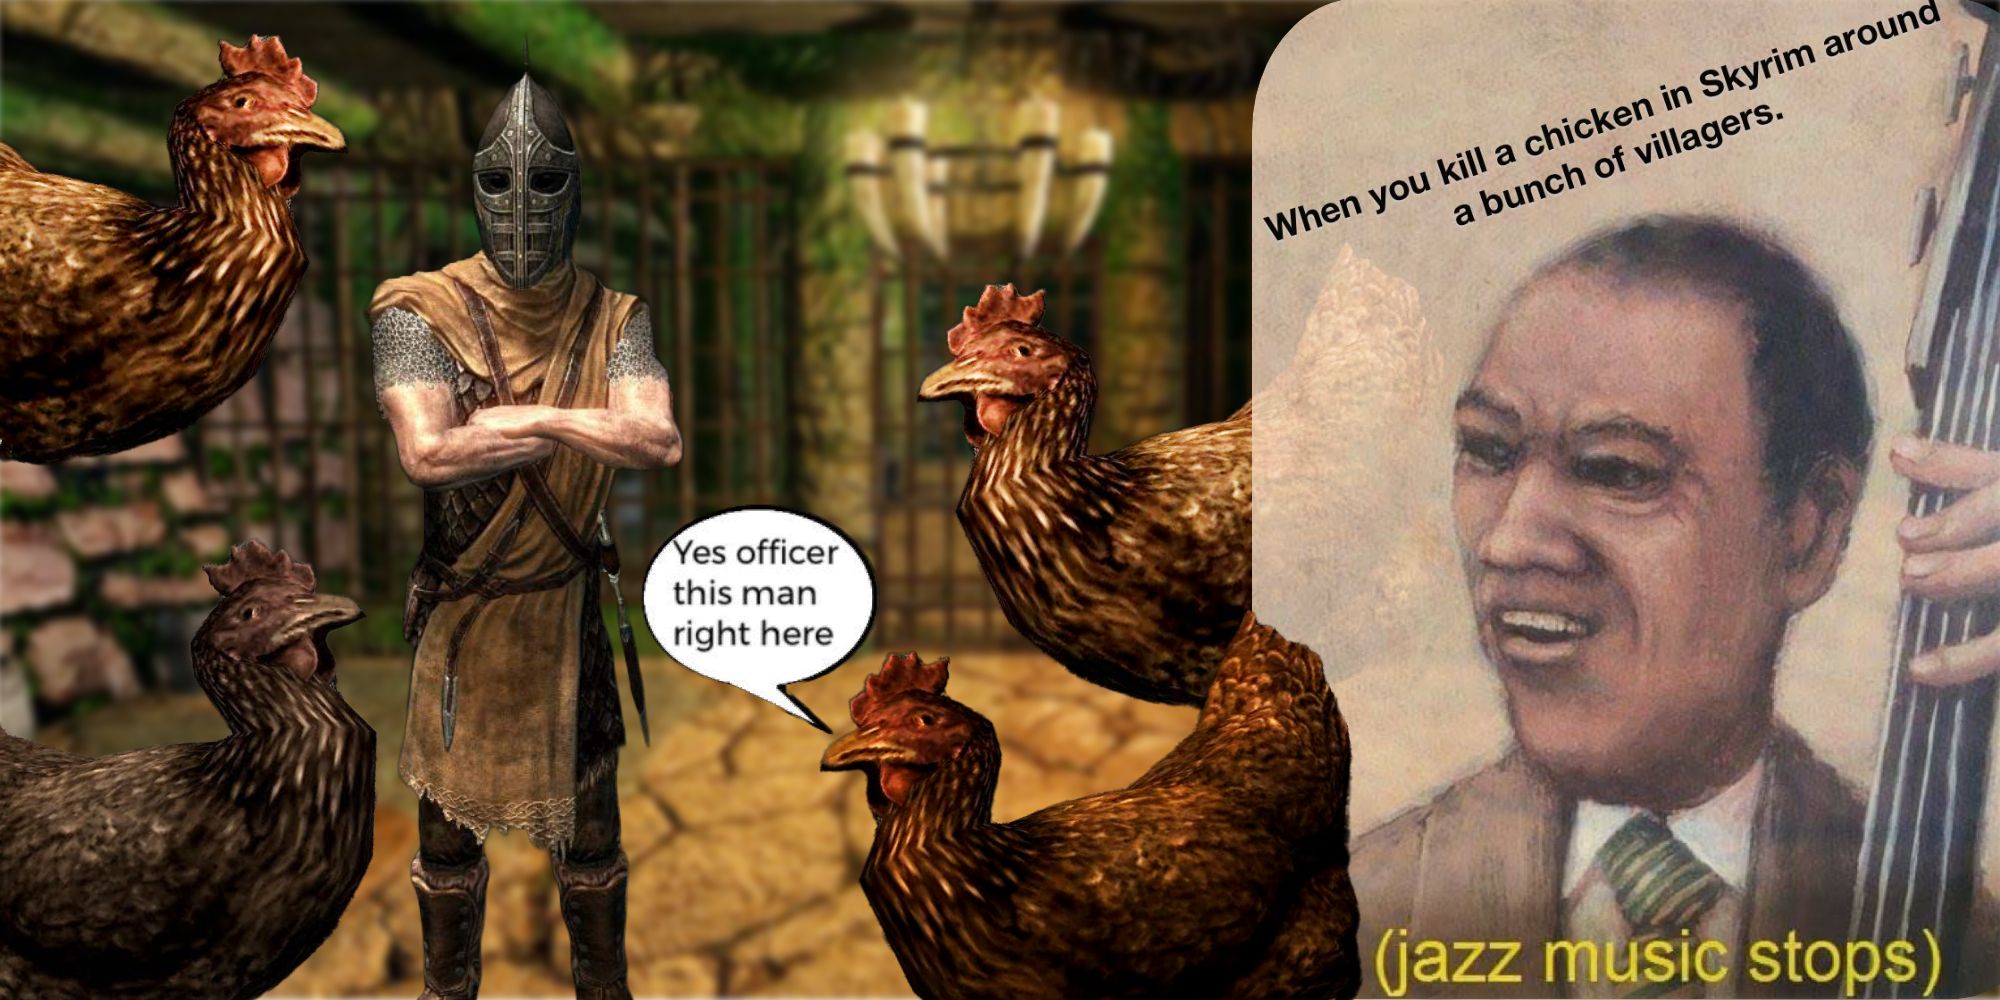 A Skyrim guard stands with arms crossed, surrounded by four chickens. A meme on the right side of the image depicts an outraged jazz musician.